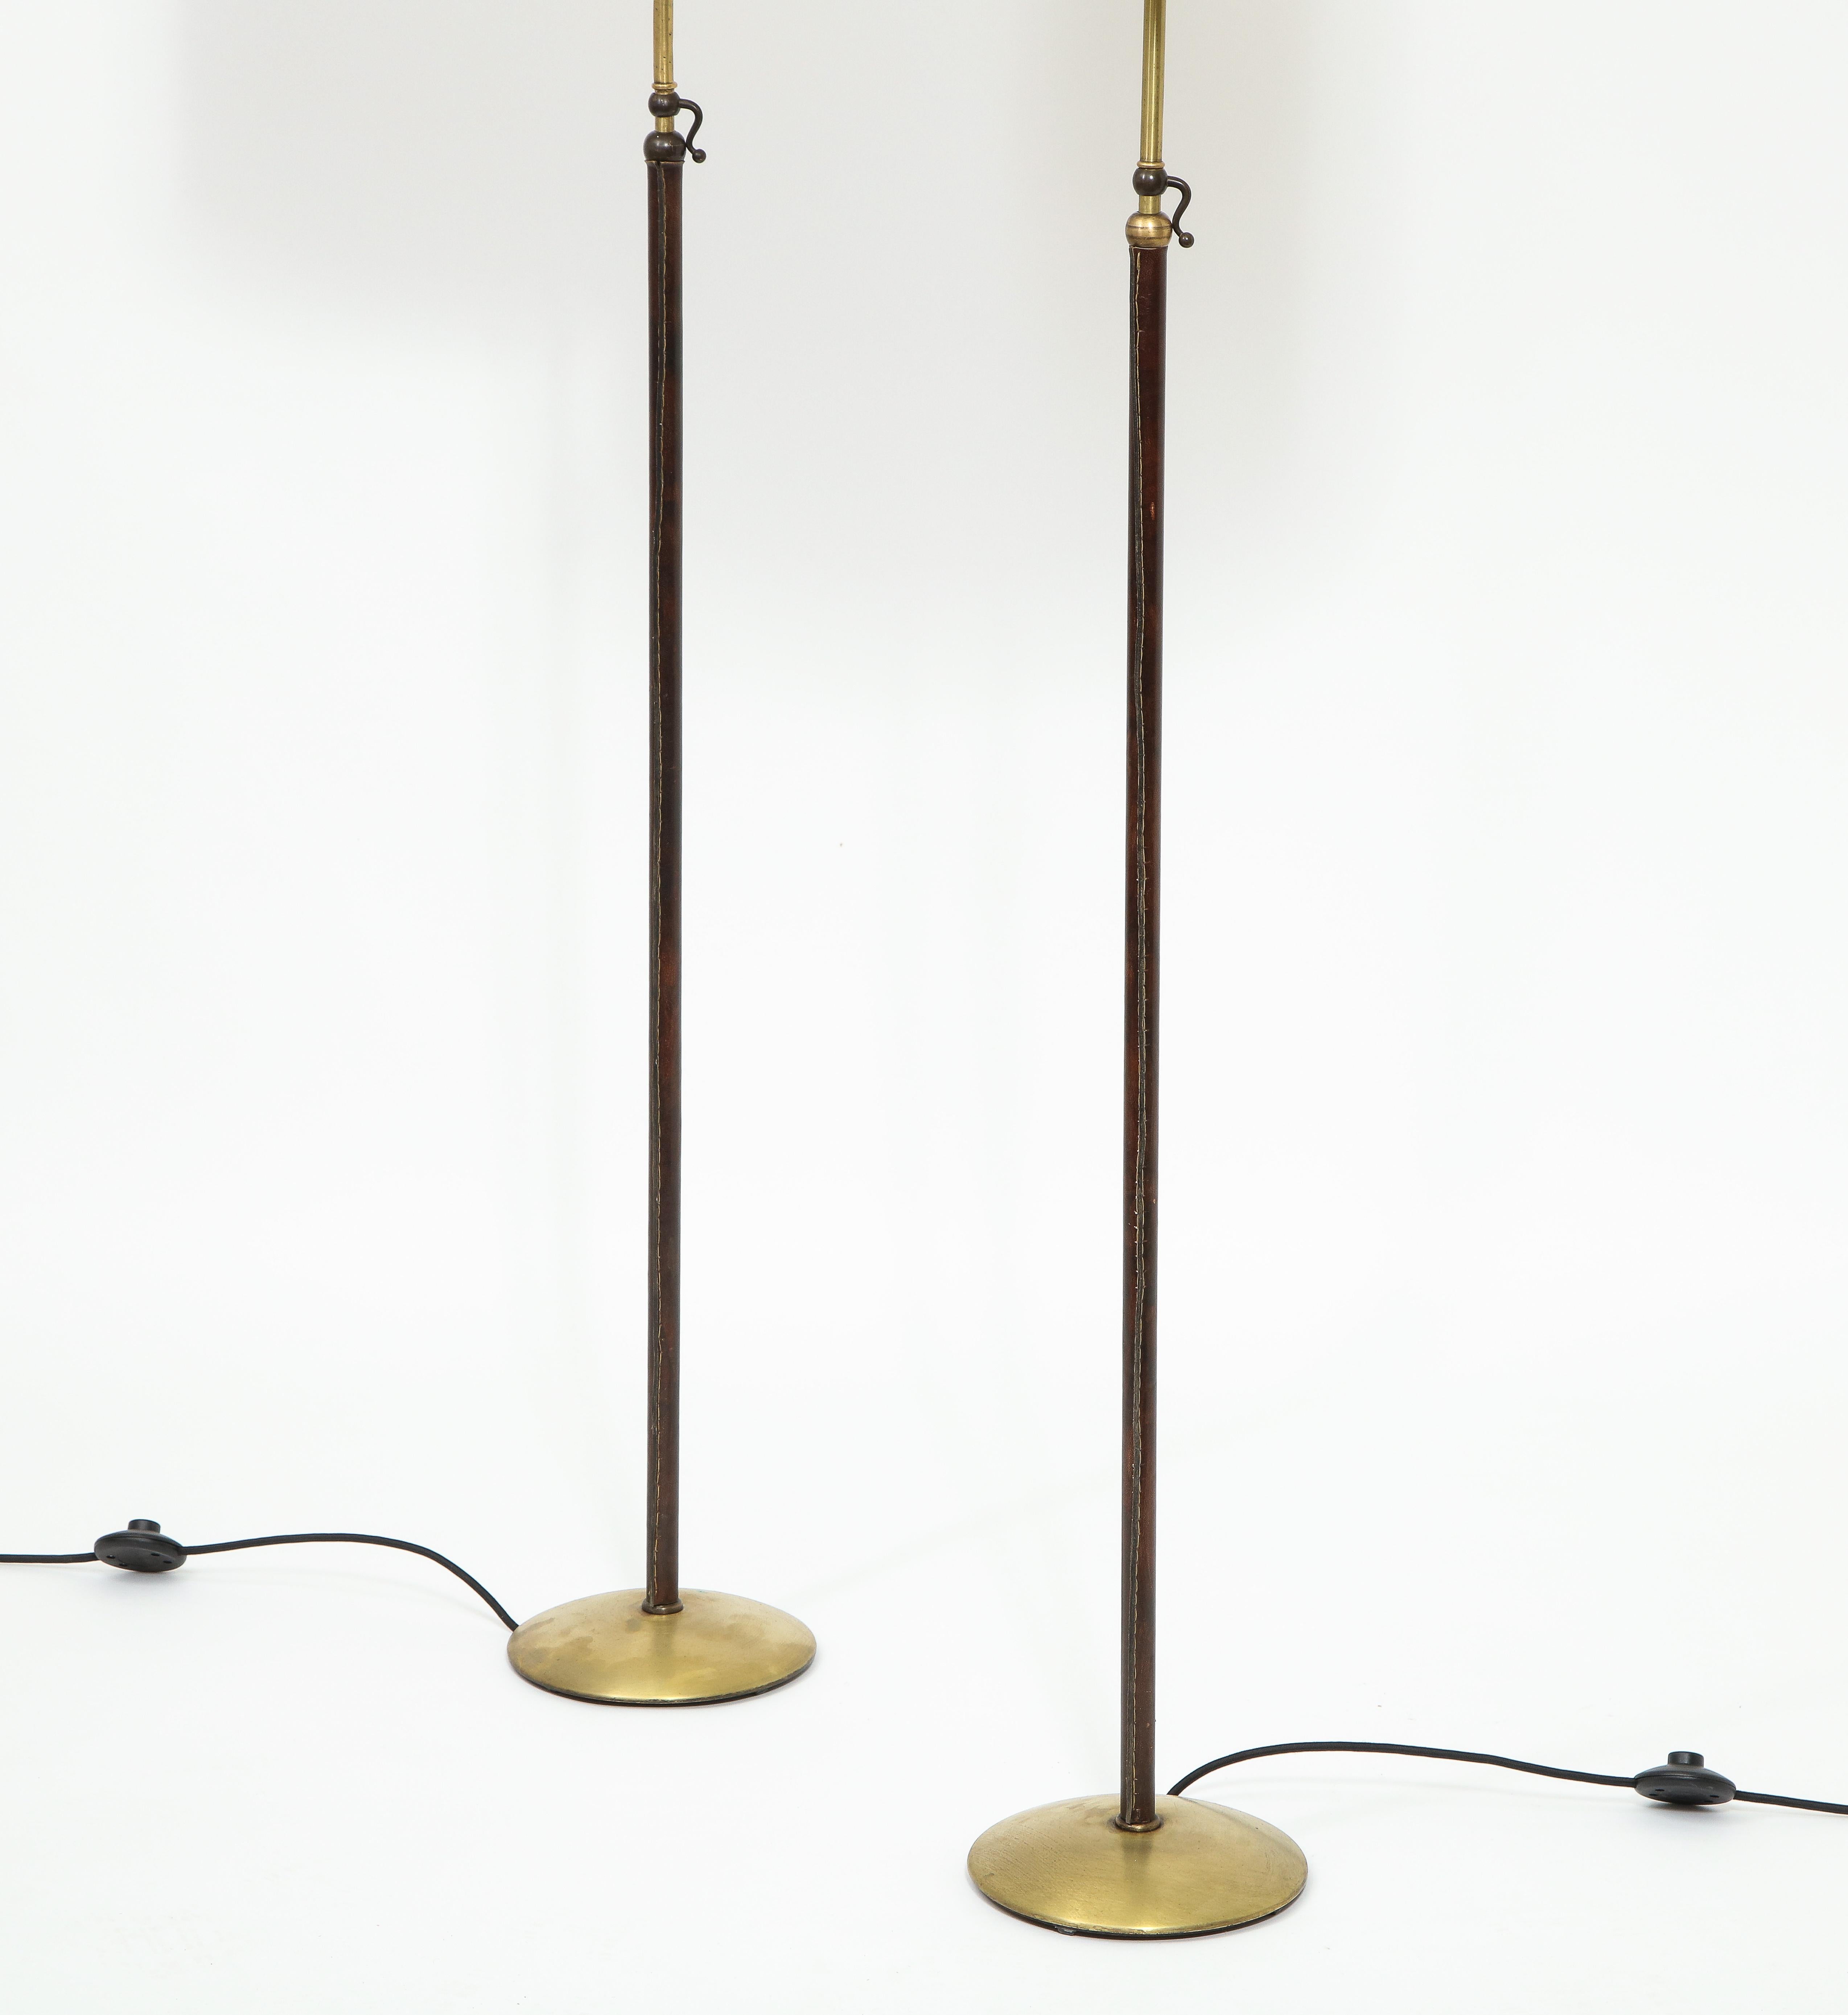 French Pair of Leather and Brass Adjustable Floor Lamps by Jacques Adnet, France, 1950s For Sale